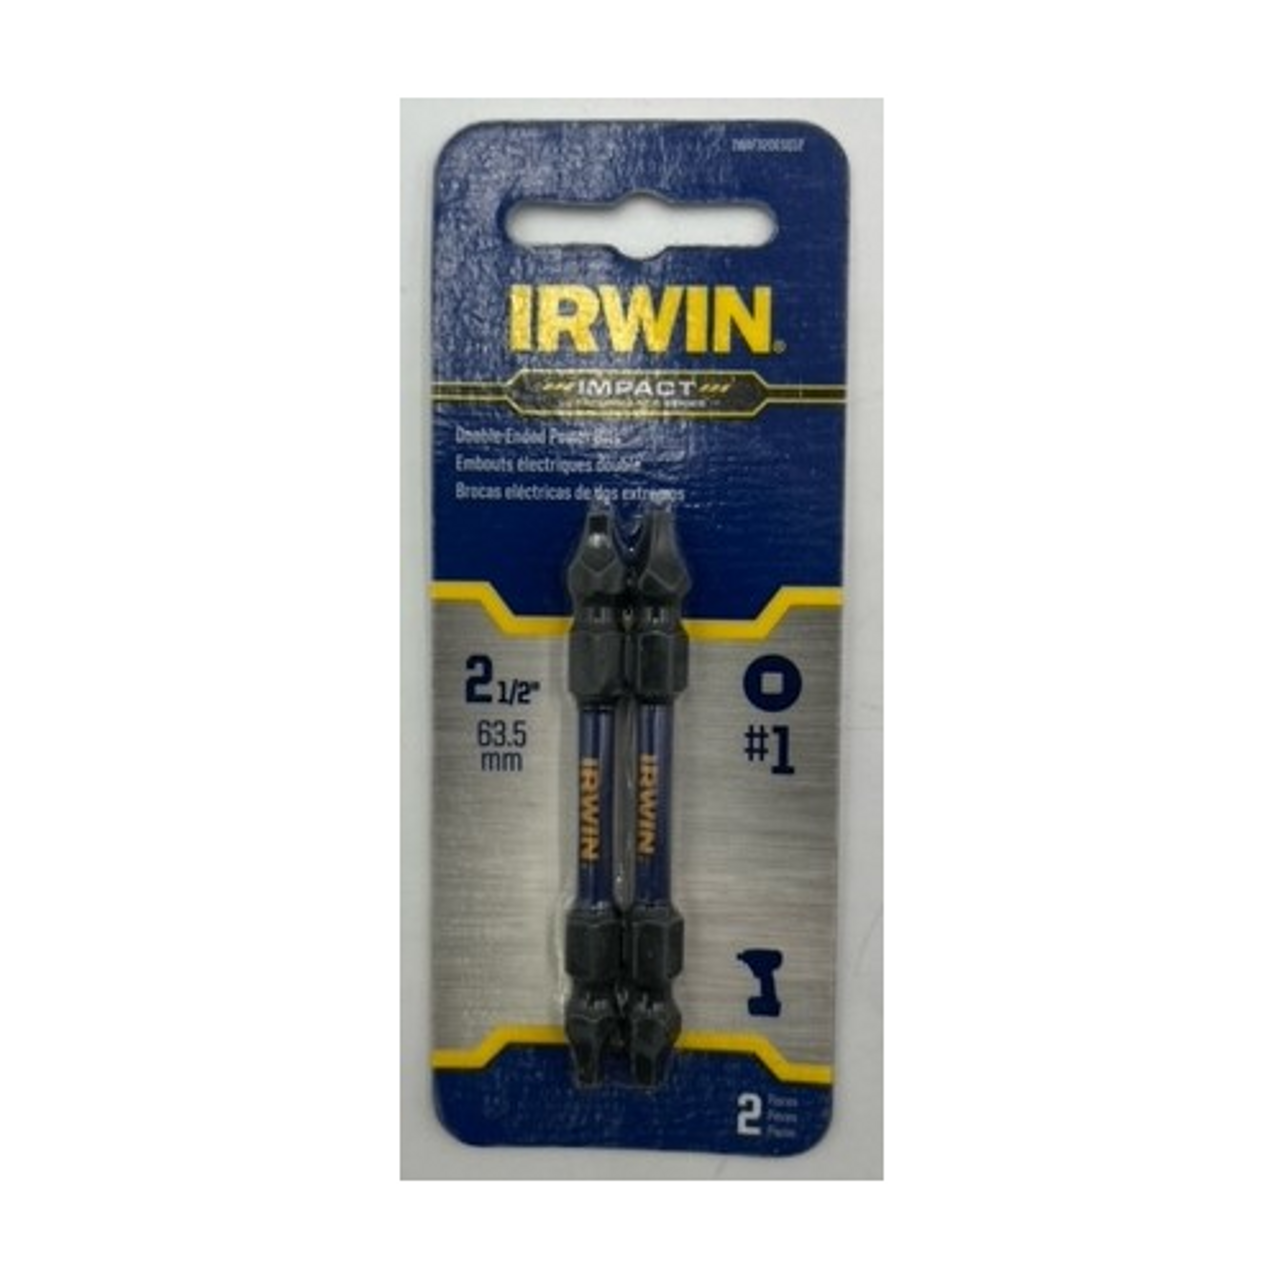 Irwin IWAF32DESQ12 Square Doujble End Impact Power Insert Bit #1 x 2 inch - 2 pack